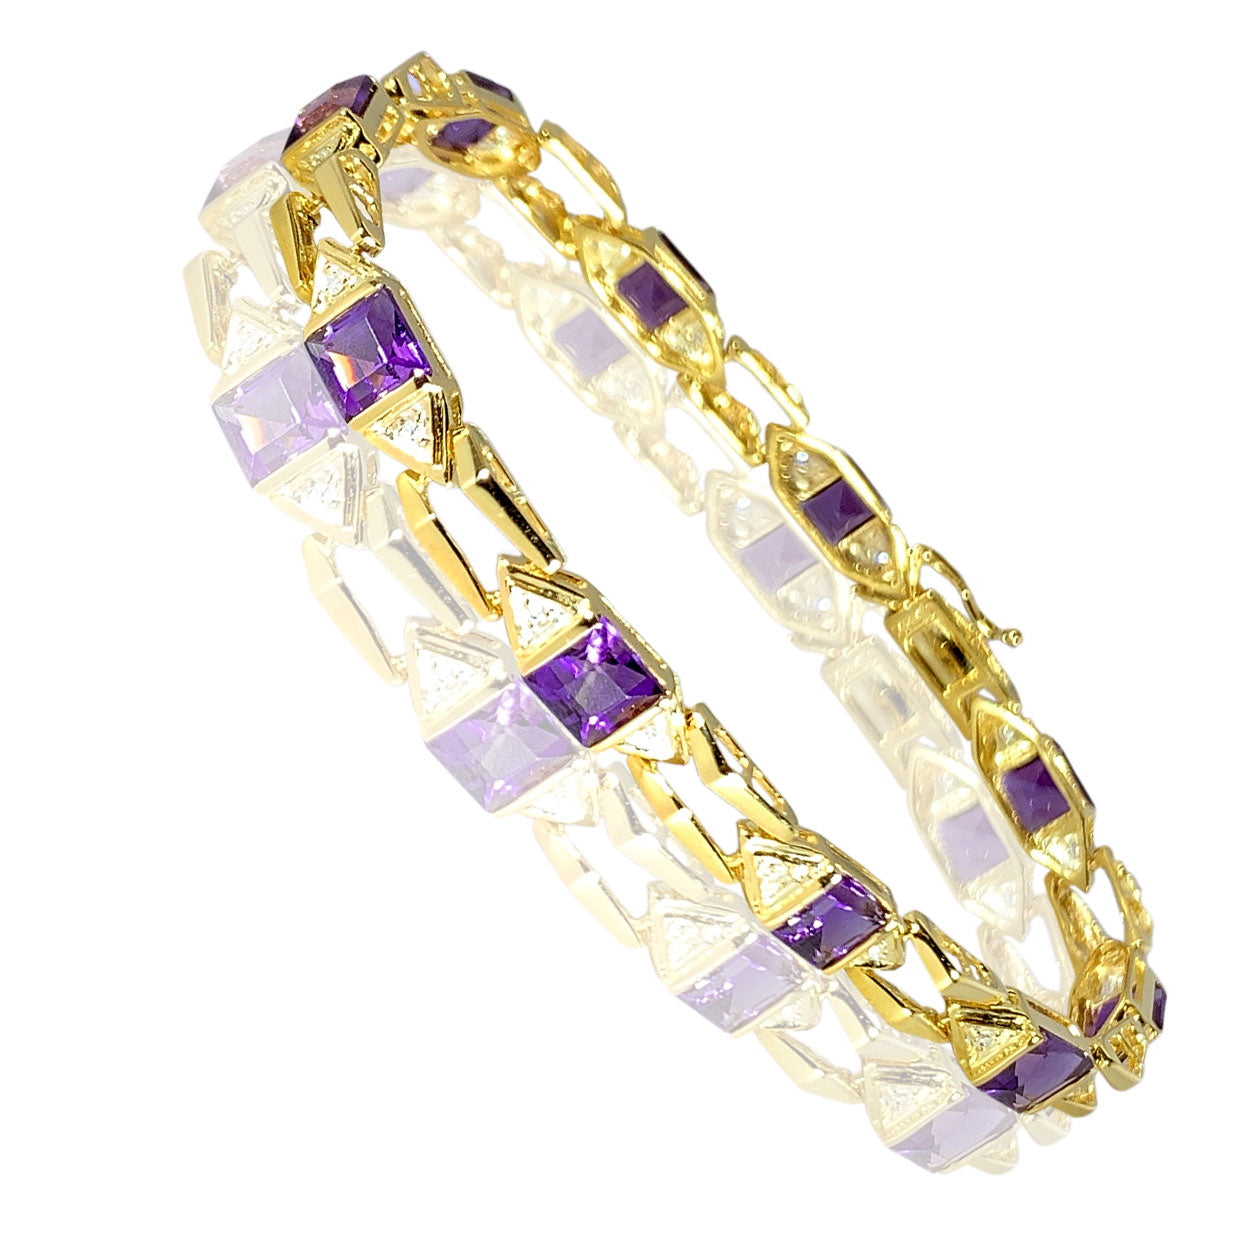 14K Yellow Gold Design with Amethysts and Diamonds 0.28 ct